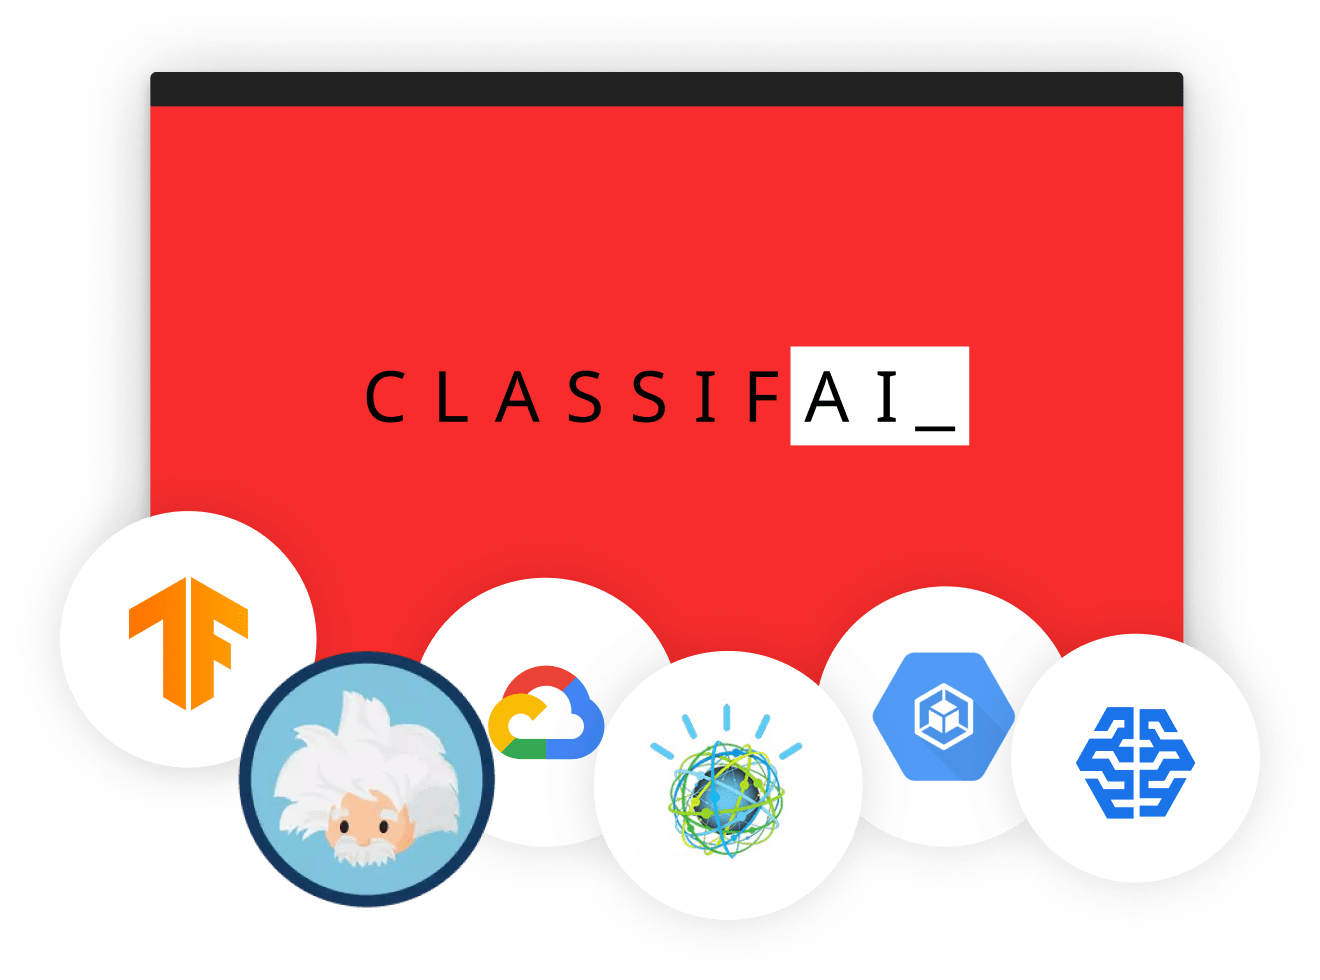 Logos for services ClassifAI will integrate with in the future, such as Google Cloud AI, Amazon SageMaker AI, Einstein AI, TensorFlow, and other emerging technologies.